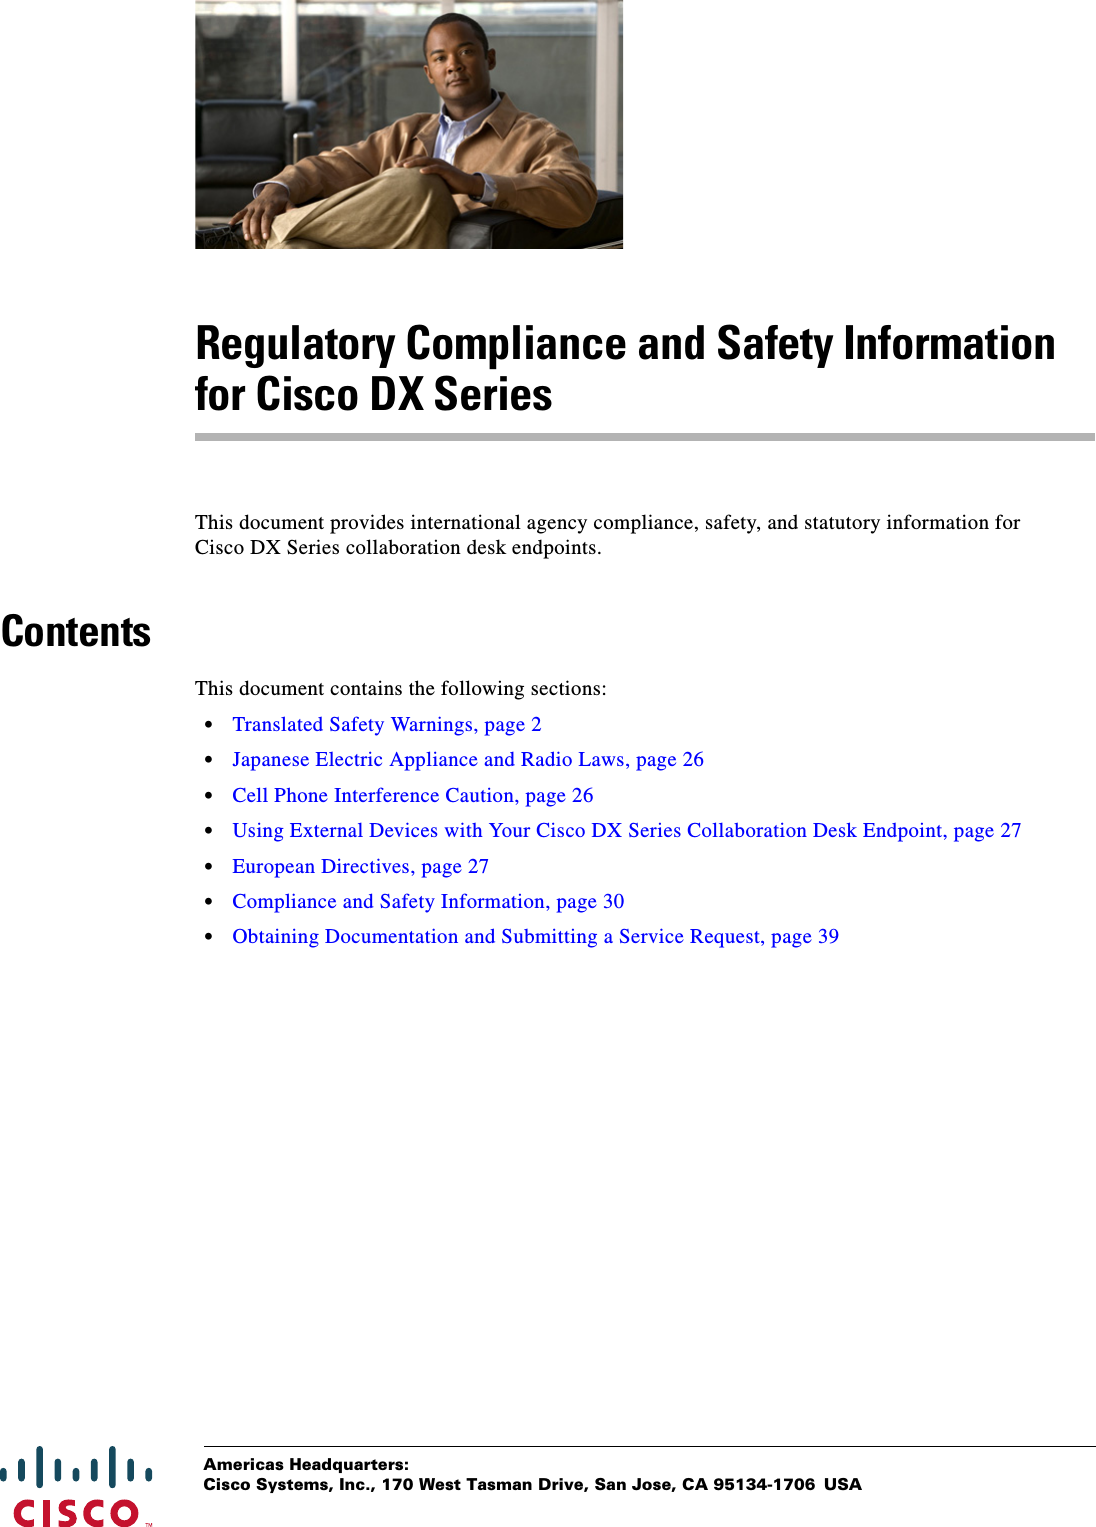  Americas Headquarters:Cisco Systems, Inc., 170 West Tasman Drive, San Jose, CA 95134-1706 USARegulatory Compliance and Safety Information for Cisco DX SeriesThis document provides international agency compliance, safety, and statutory information for Cisco DX Series collaboration desk endpoints.ContentsThis document contains the following sections:•Translated Safety Warnings, page 2•Japanese Electric Appliance and Radio Laws, page 26•Cell Phone Interference Caution, page 26•Using External Devices with Your Cisco DX Series Collaboration Desk Endpoint, page 27•European Directives, page 27•Compliance and Safety Information, page 30•Obtaining Documentation and Submitting a Service Request, page 39